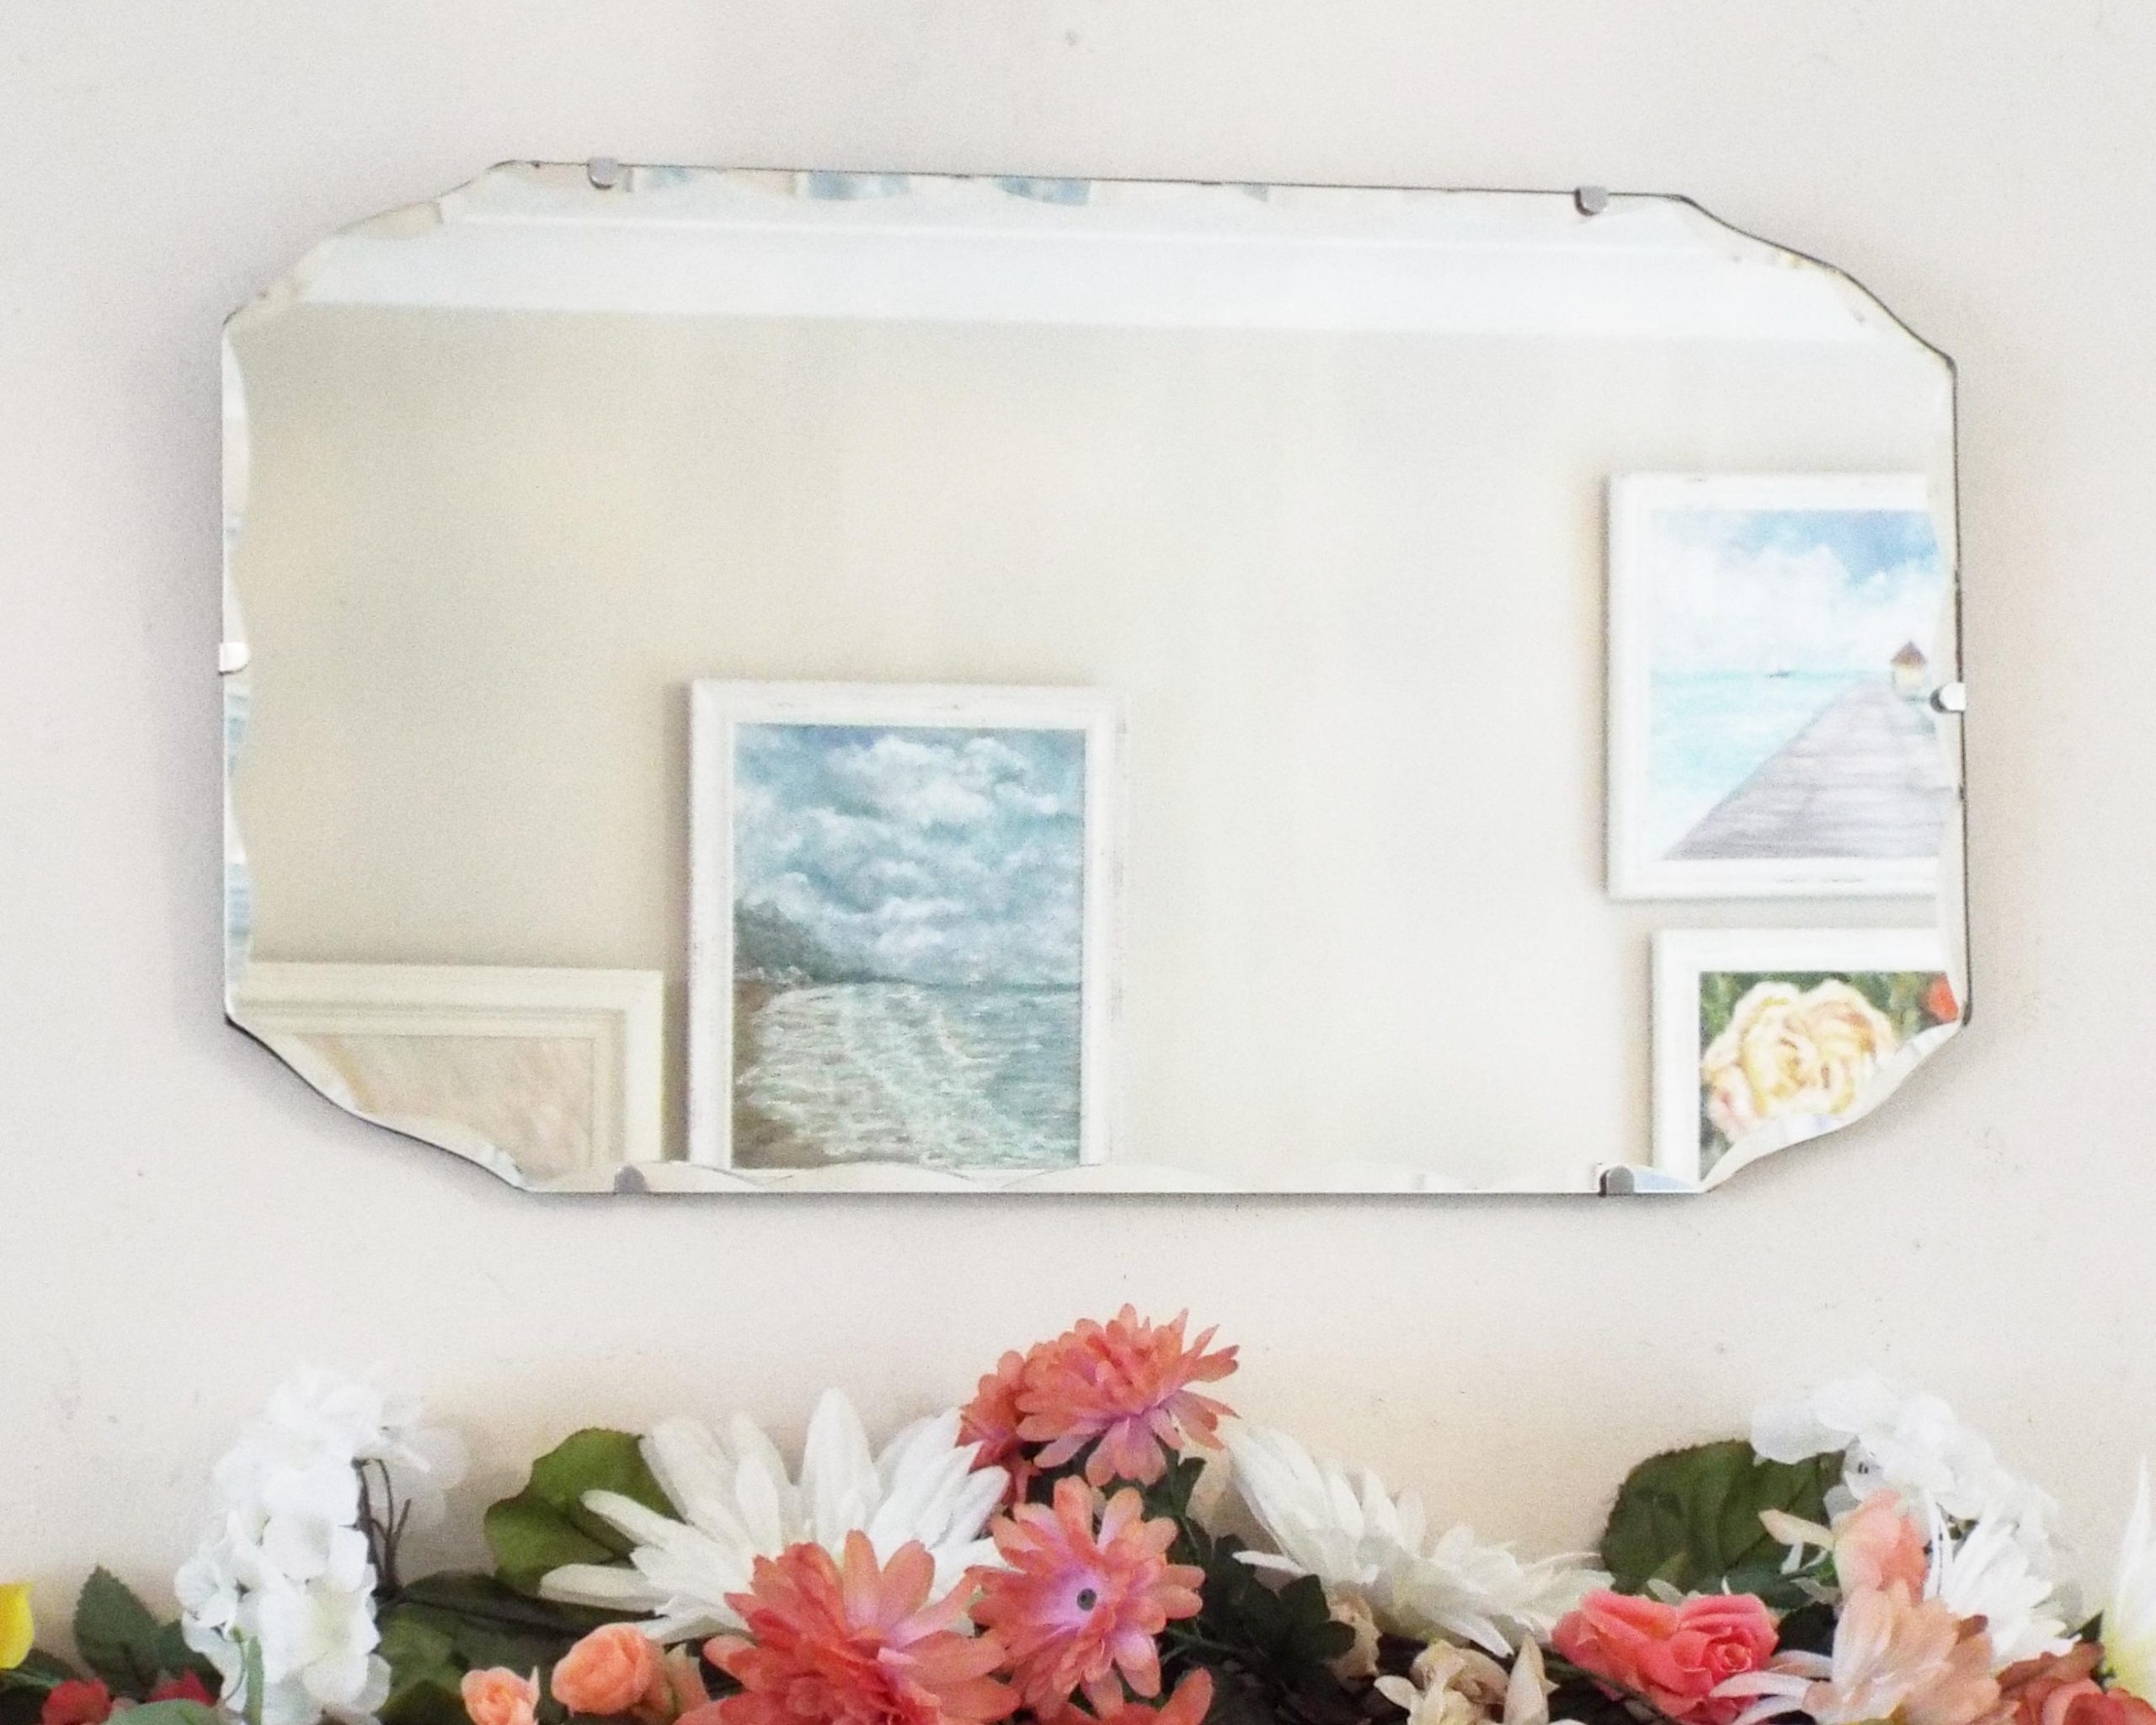 How to Use Mirrors to Decorate Your Home